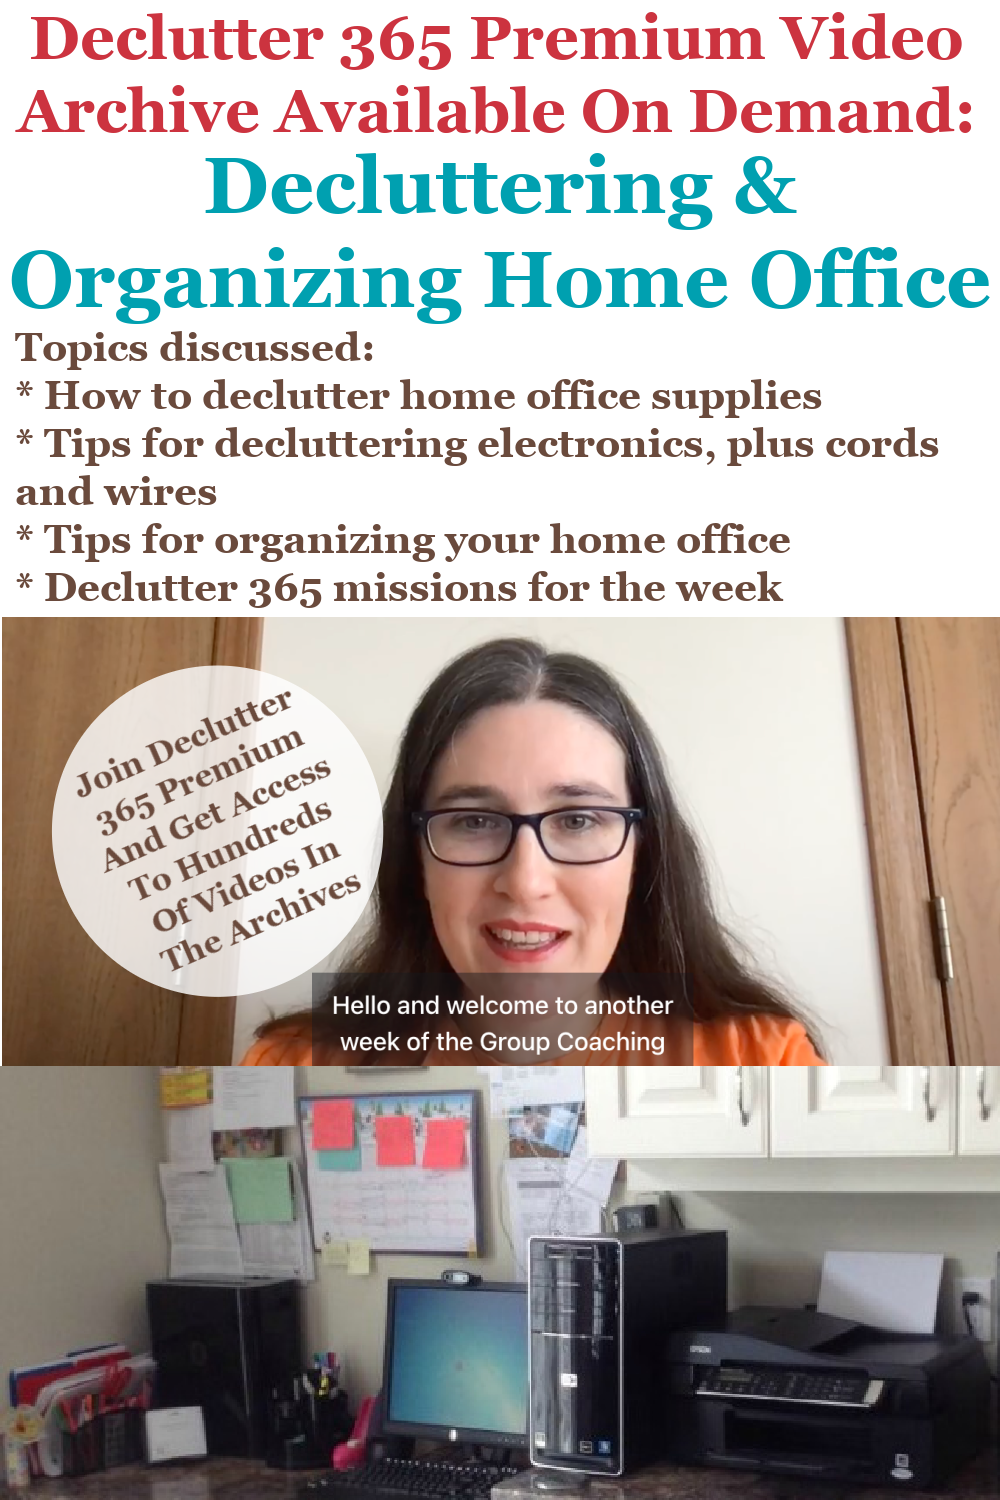 https://www.home-storage-solutions-101.com/image-files/home-office-organization-premium-topics-pinterest-image.png